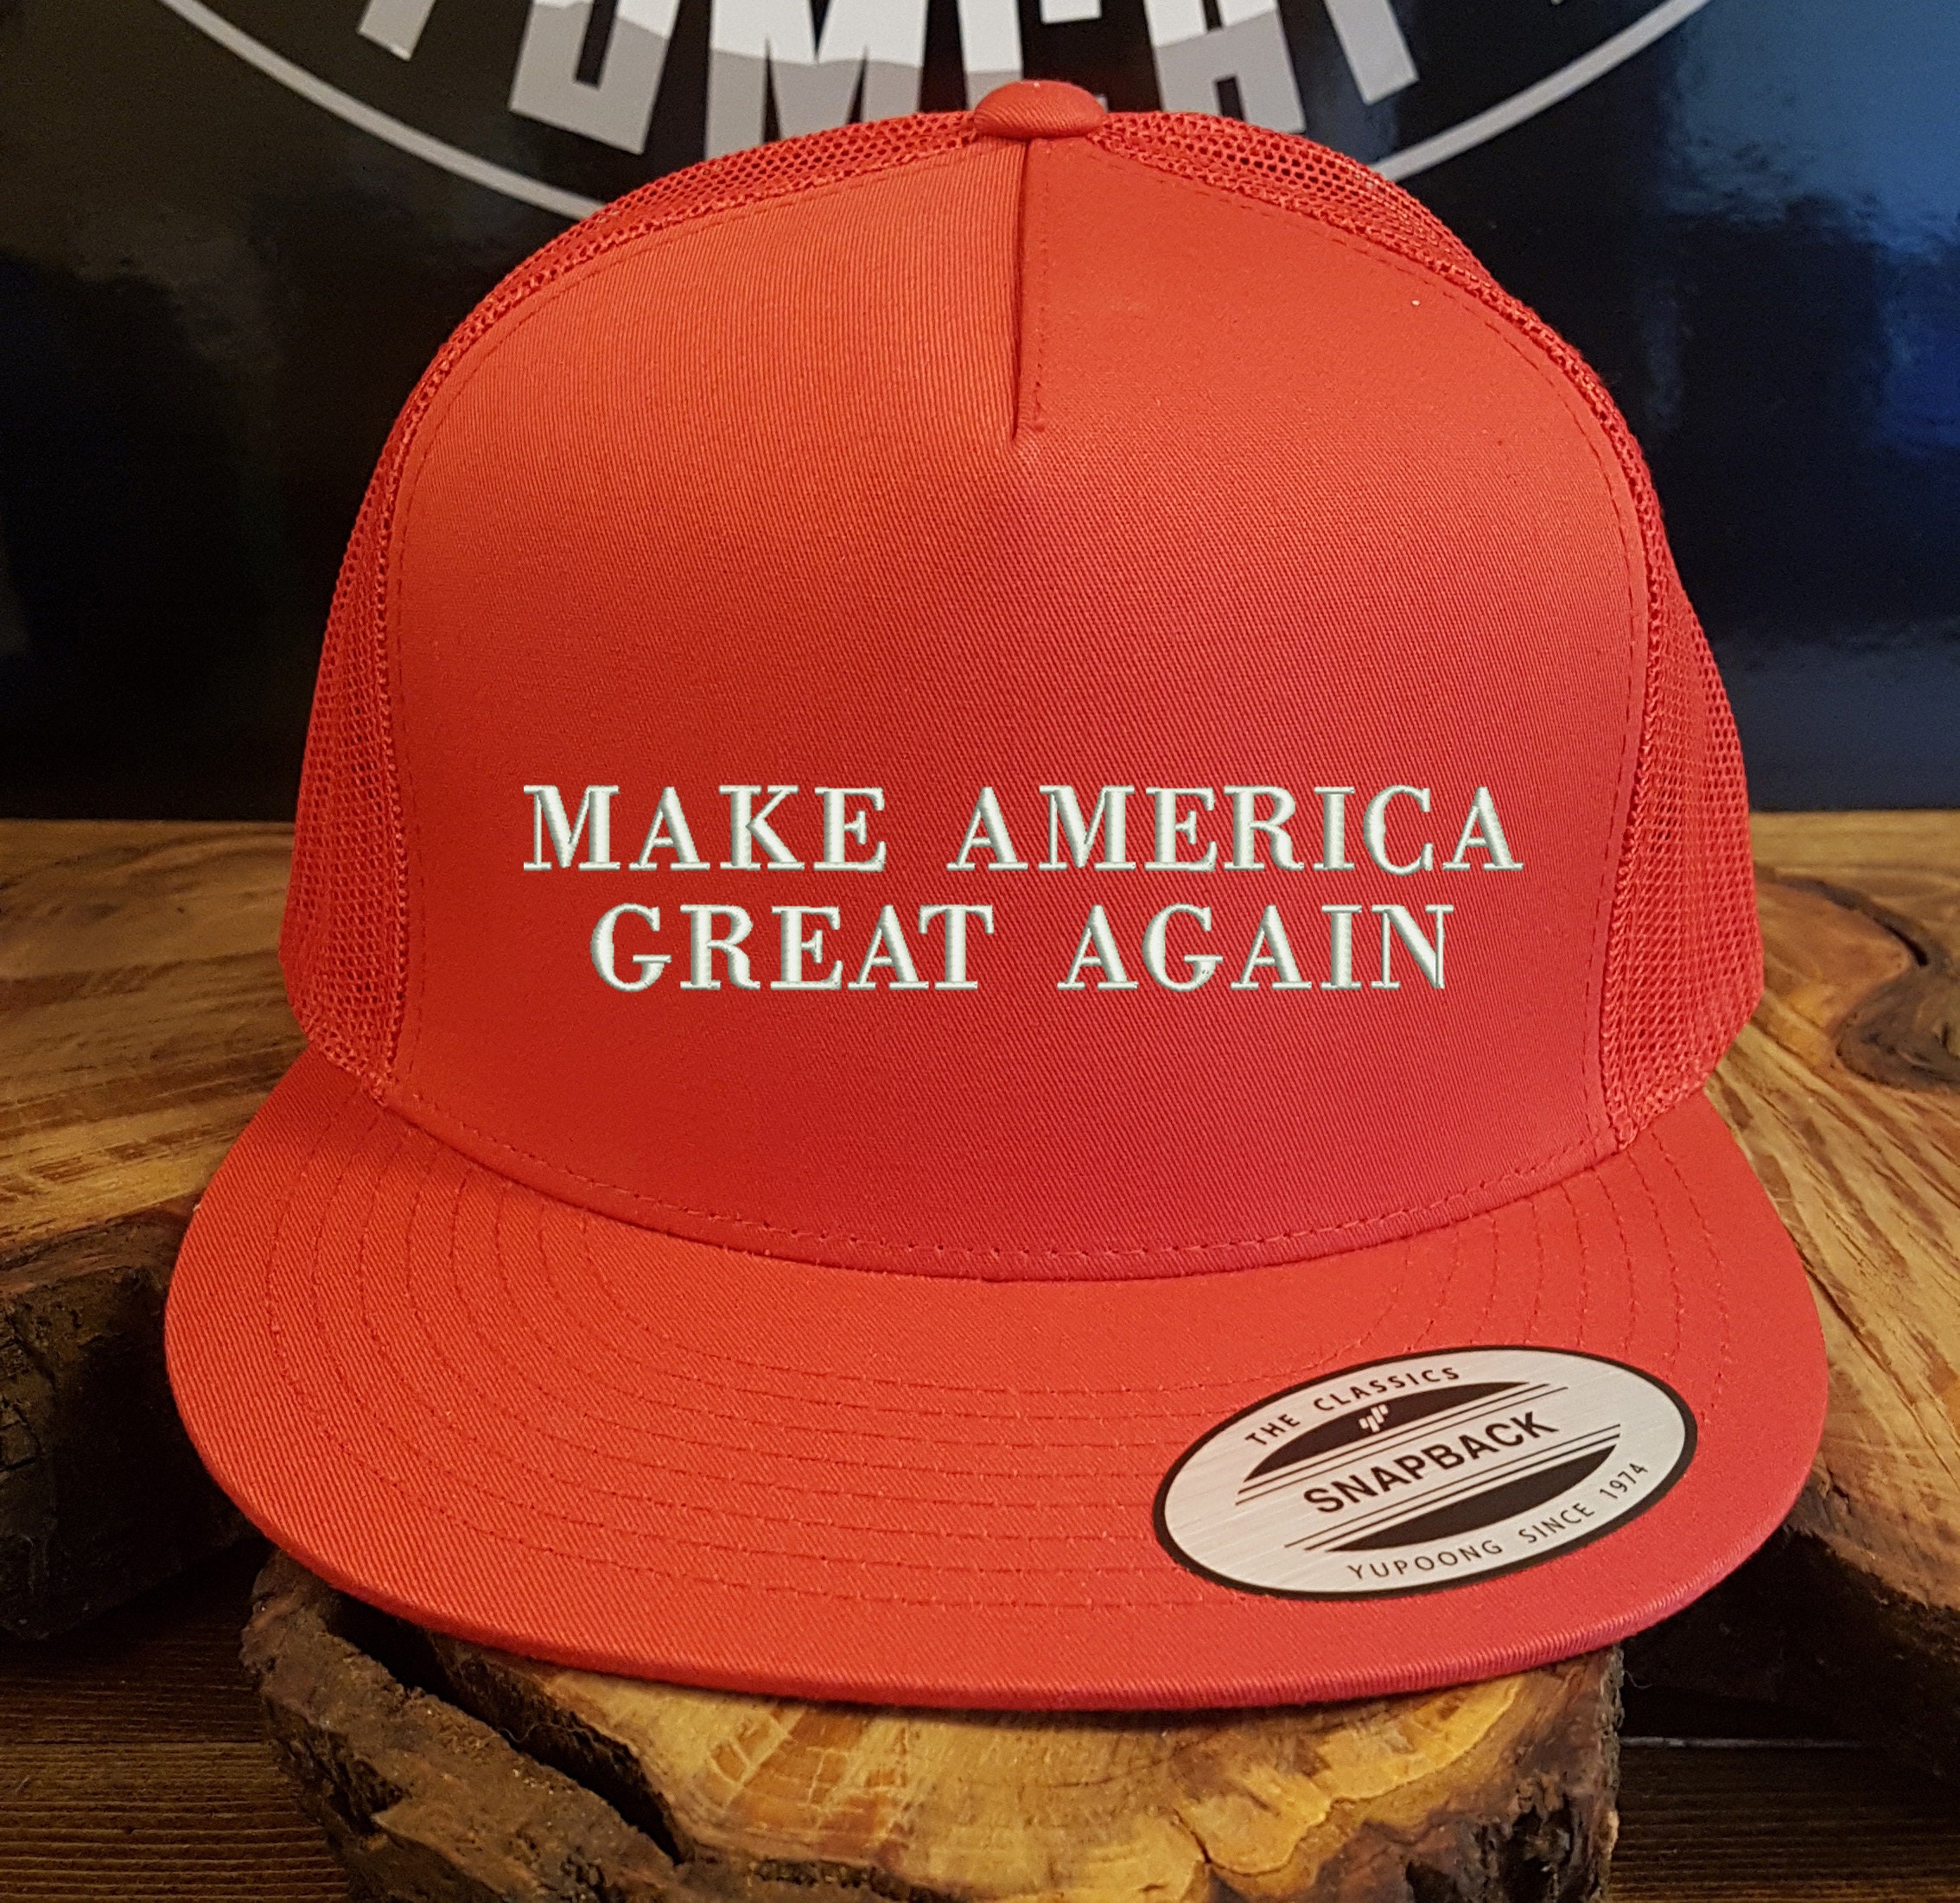 MAKE NORWAY GREAT AGAIN HAT USA DONALD TRUMP CAP RED NORGES OSLO BERGEN MAGA